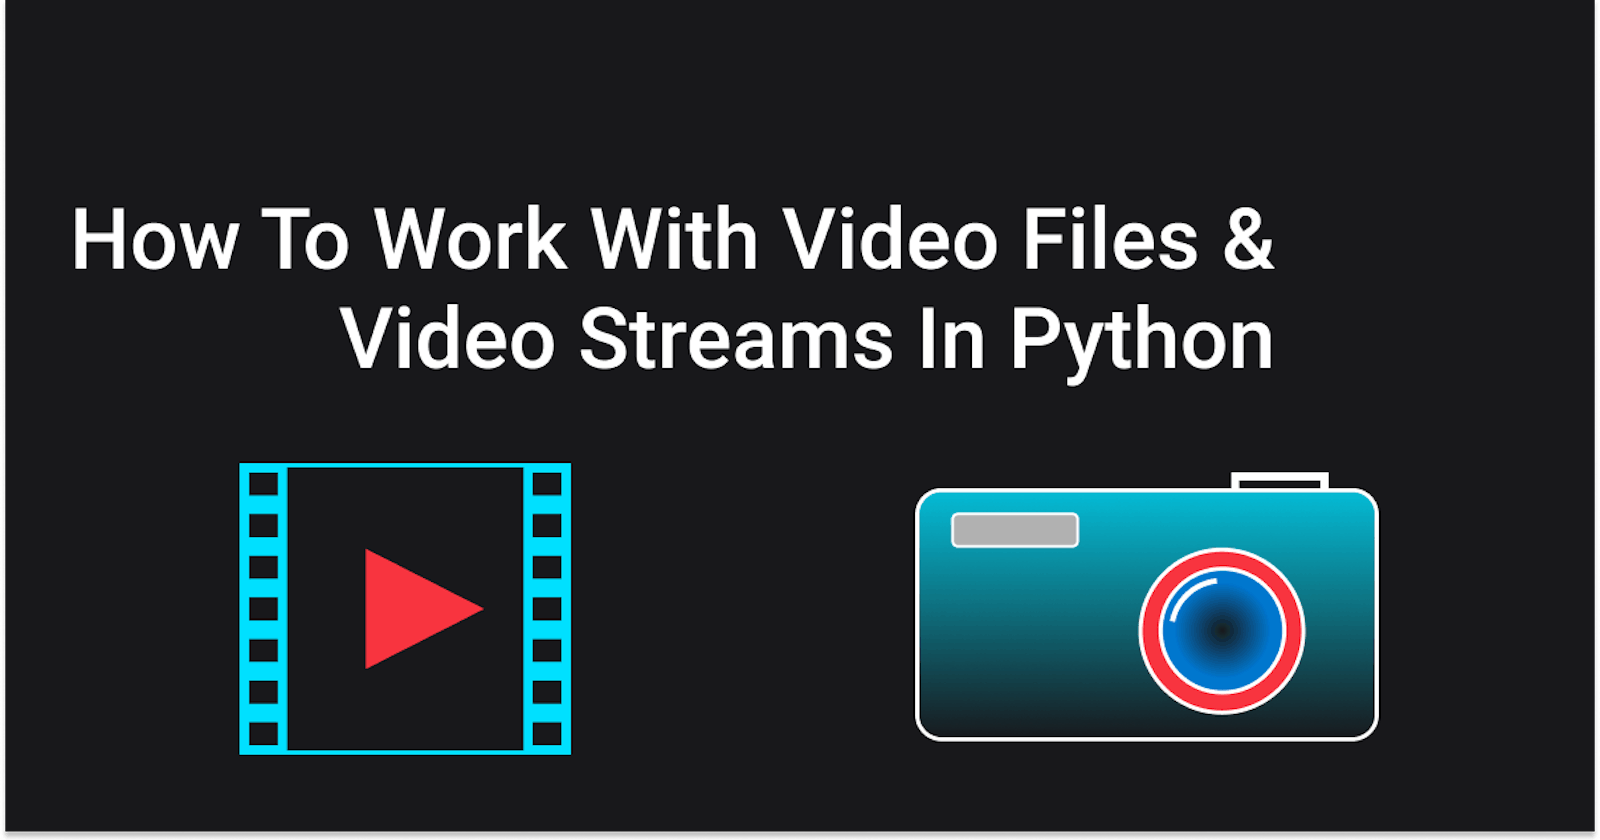 How To Work With Video Files & Video Streams In Python